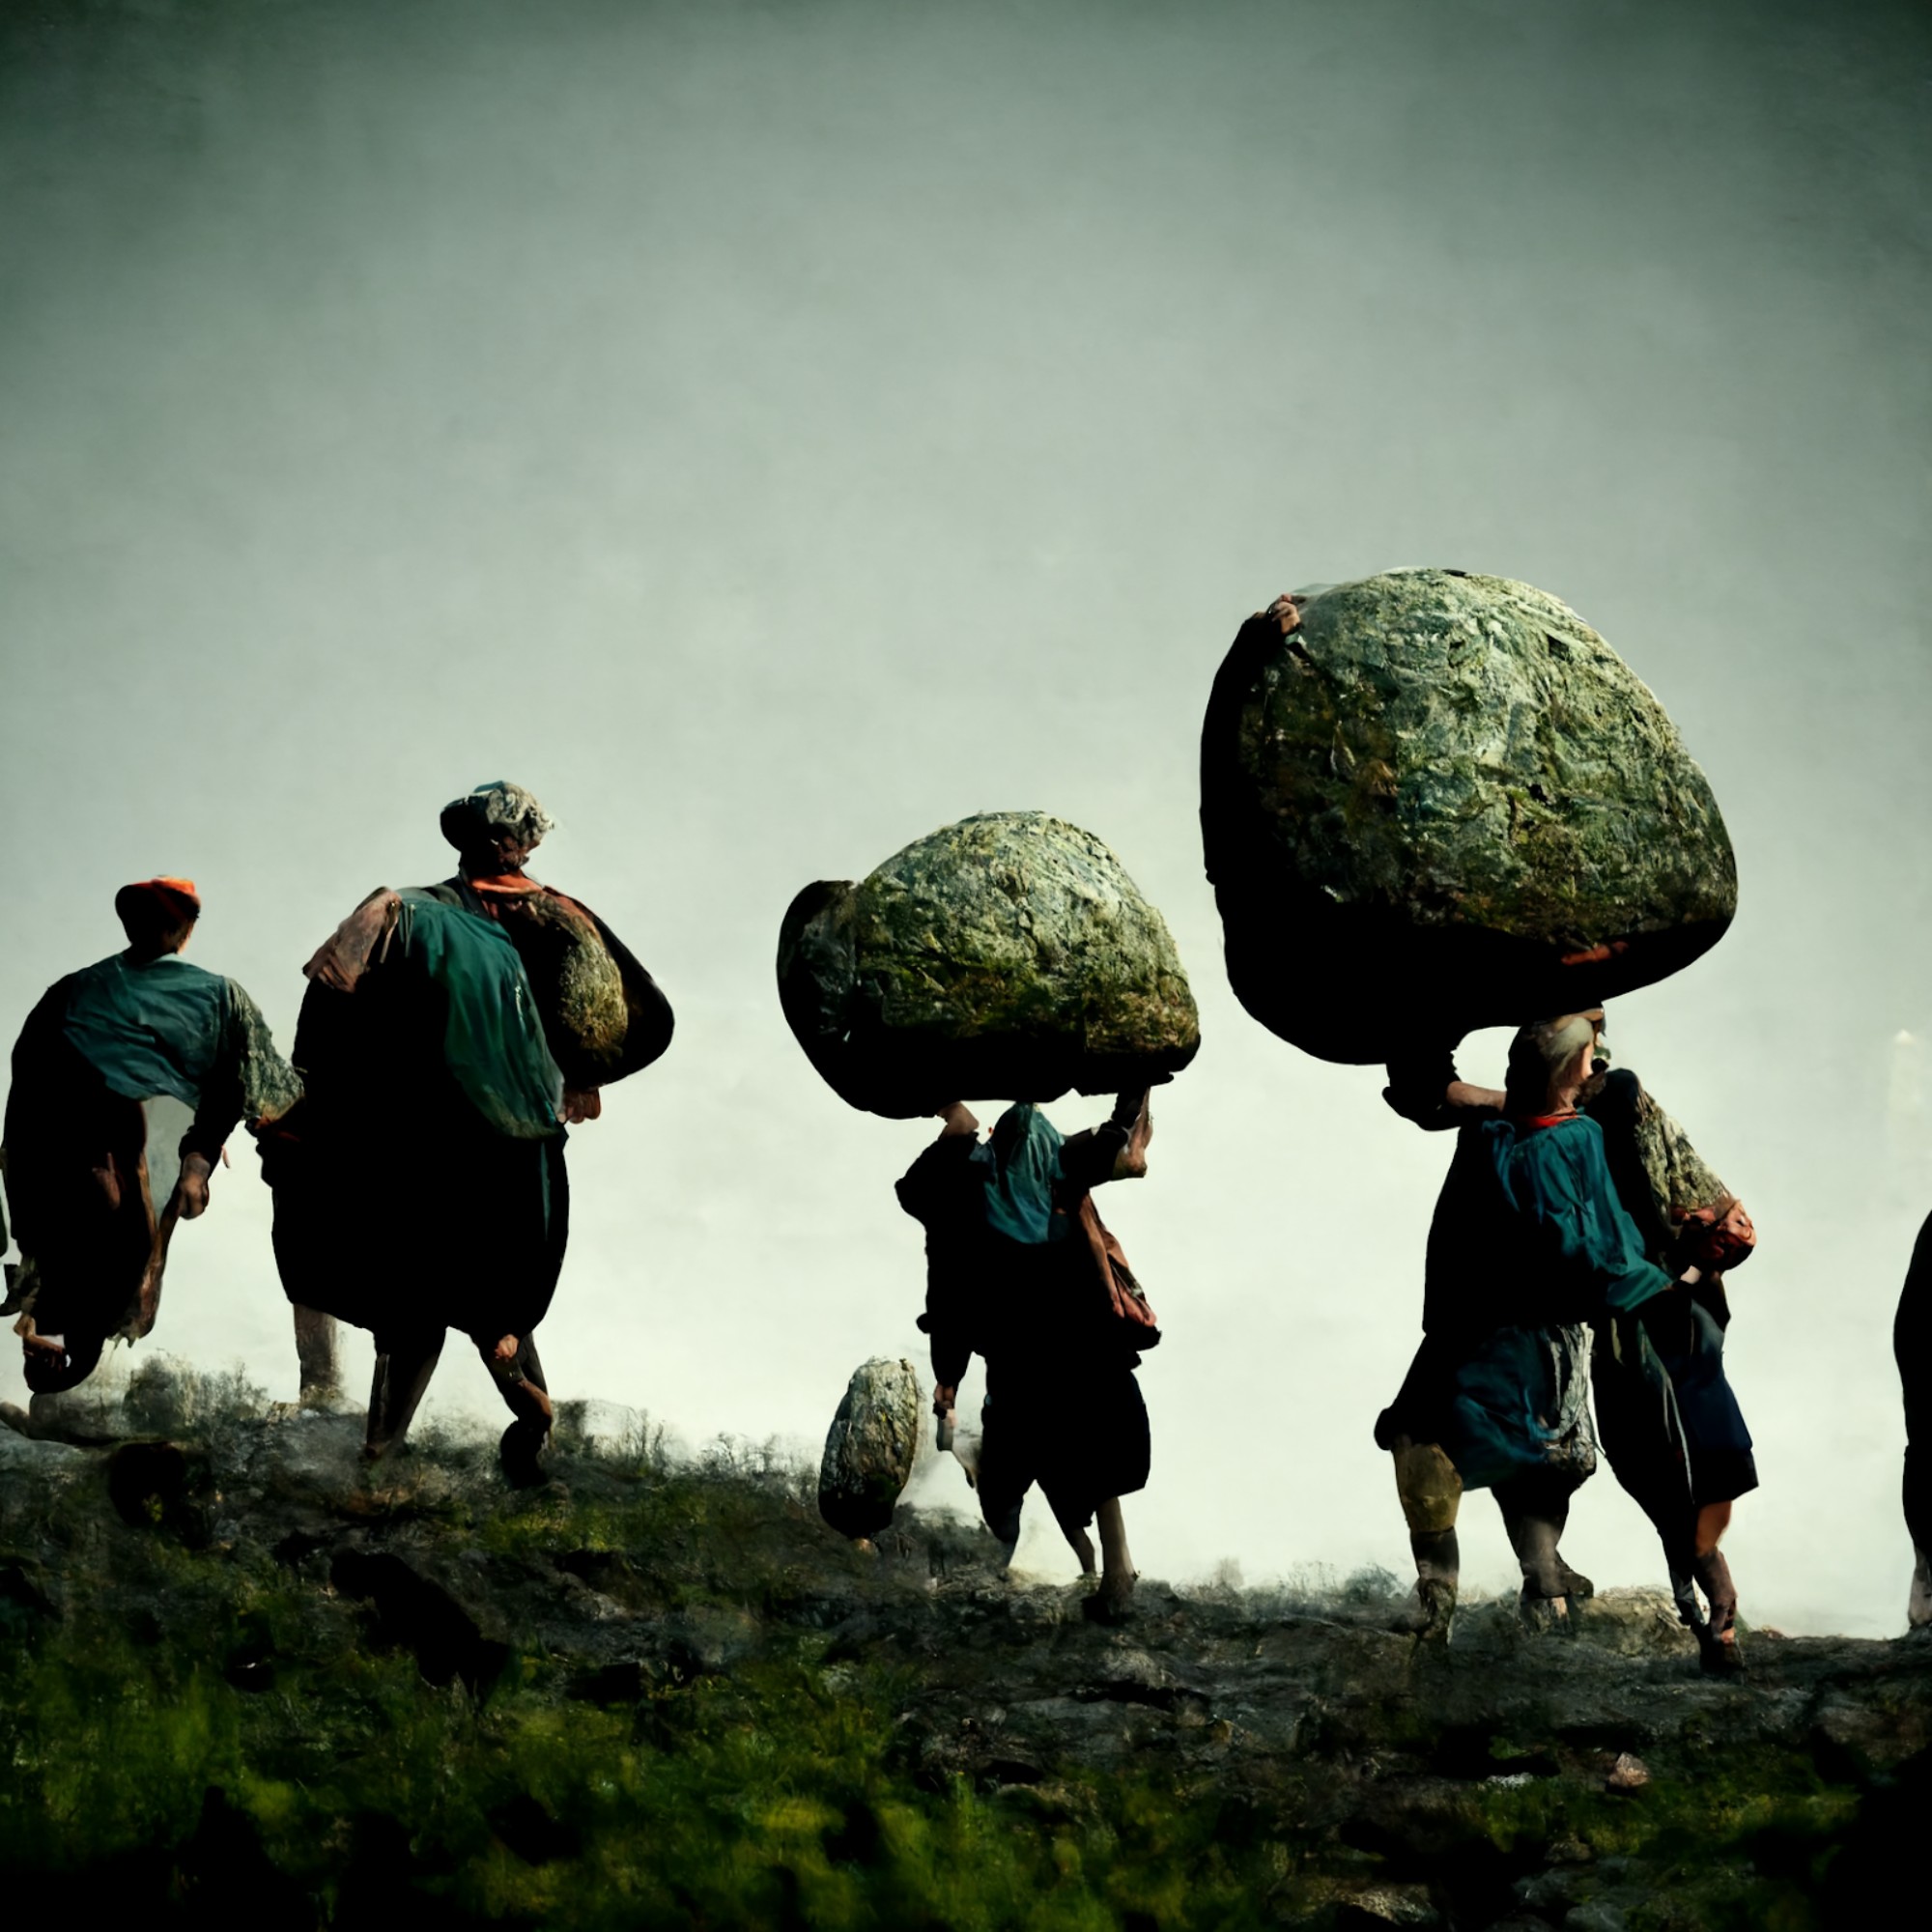 A group of people carrying large rocks